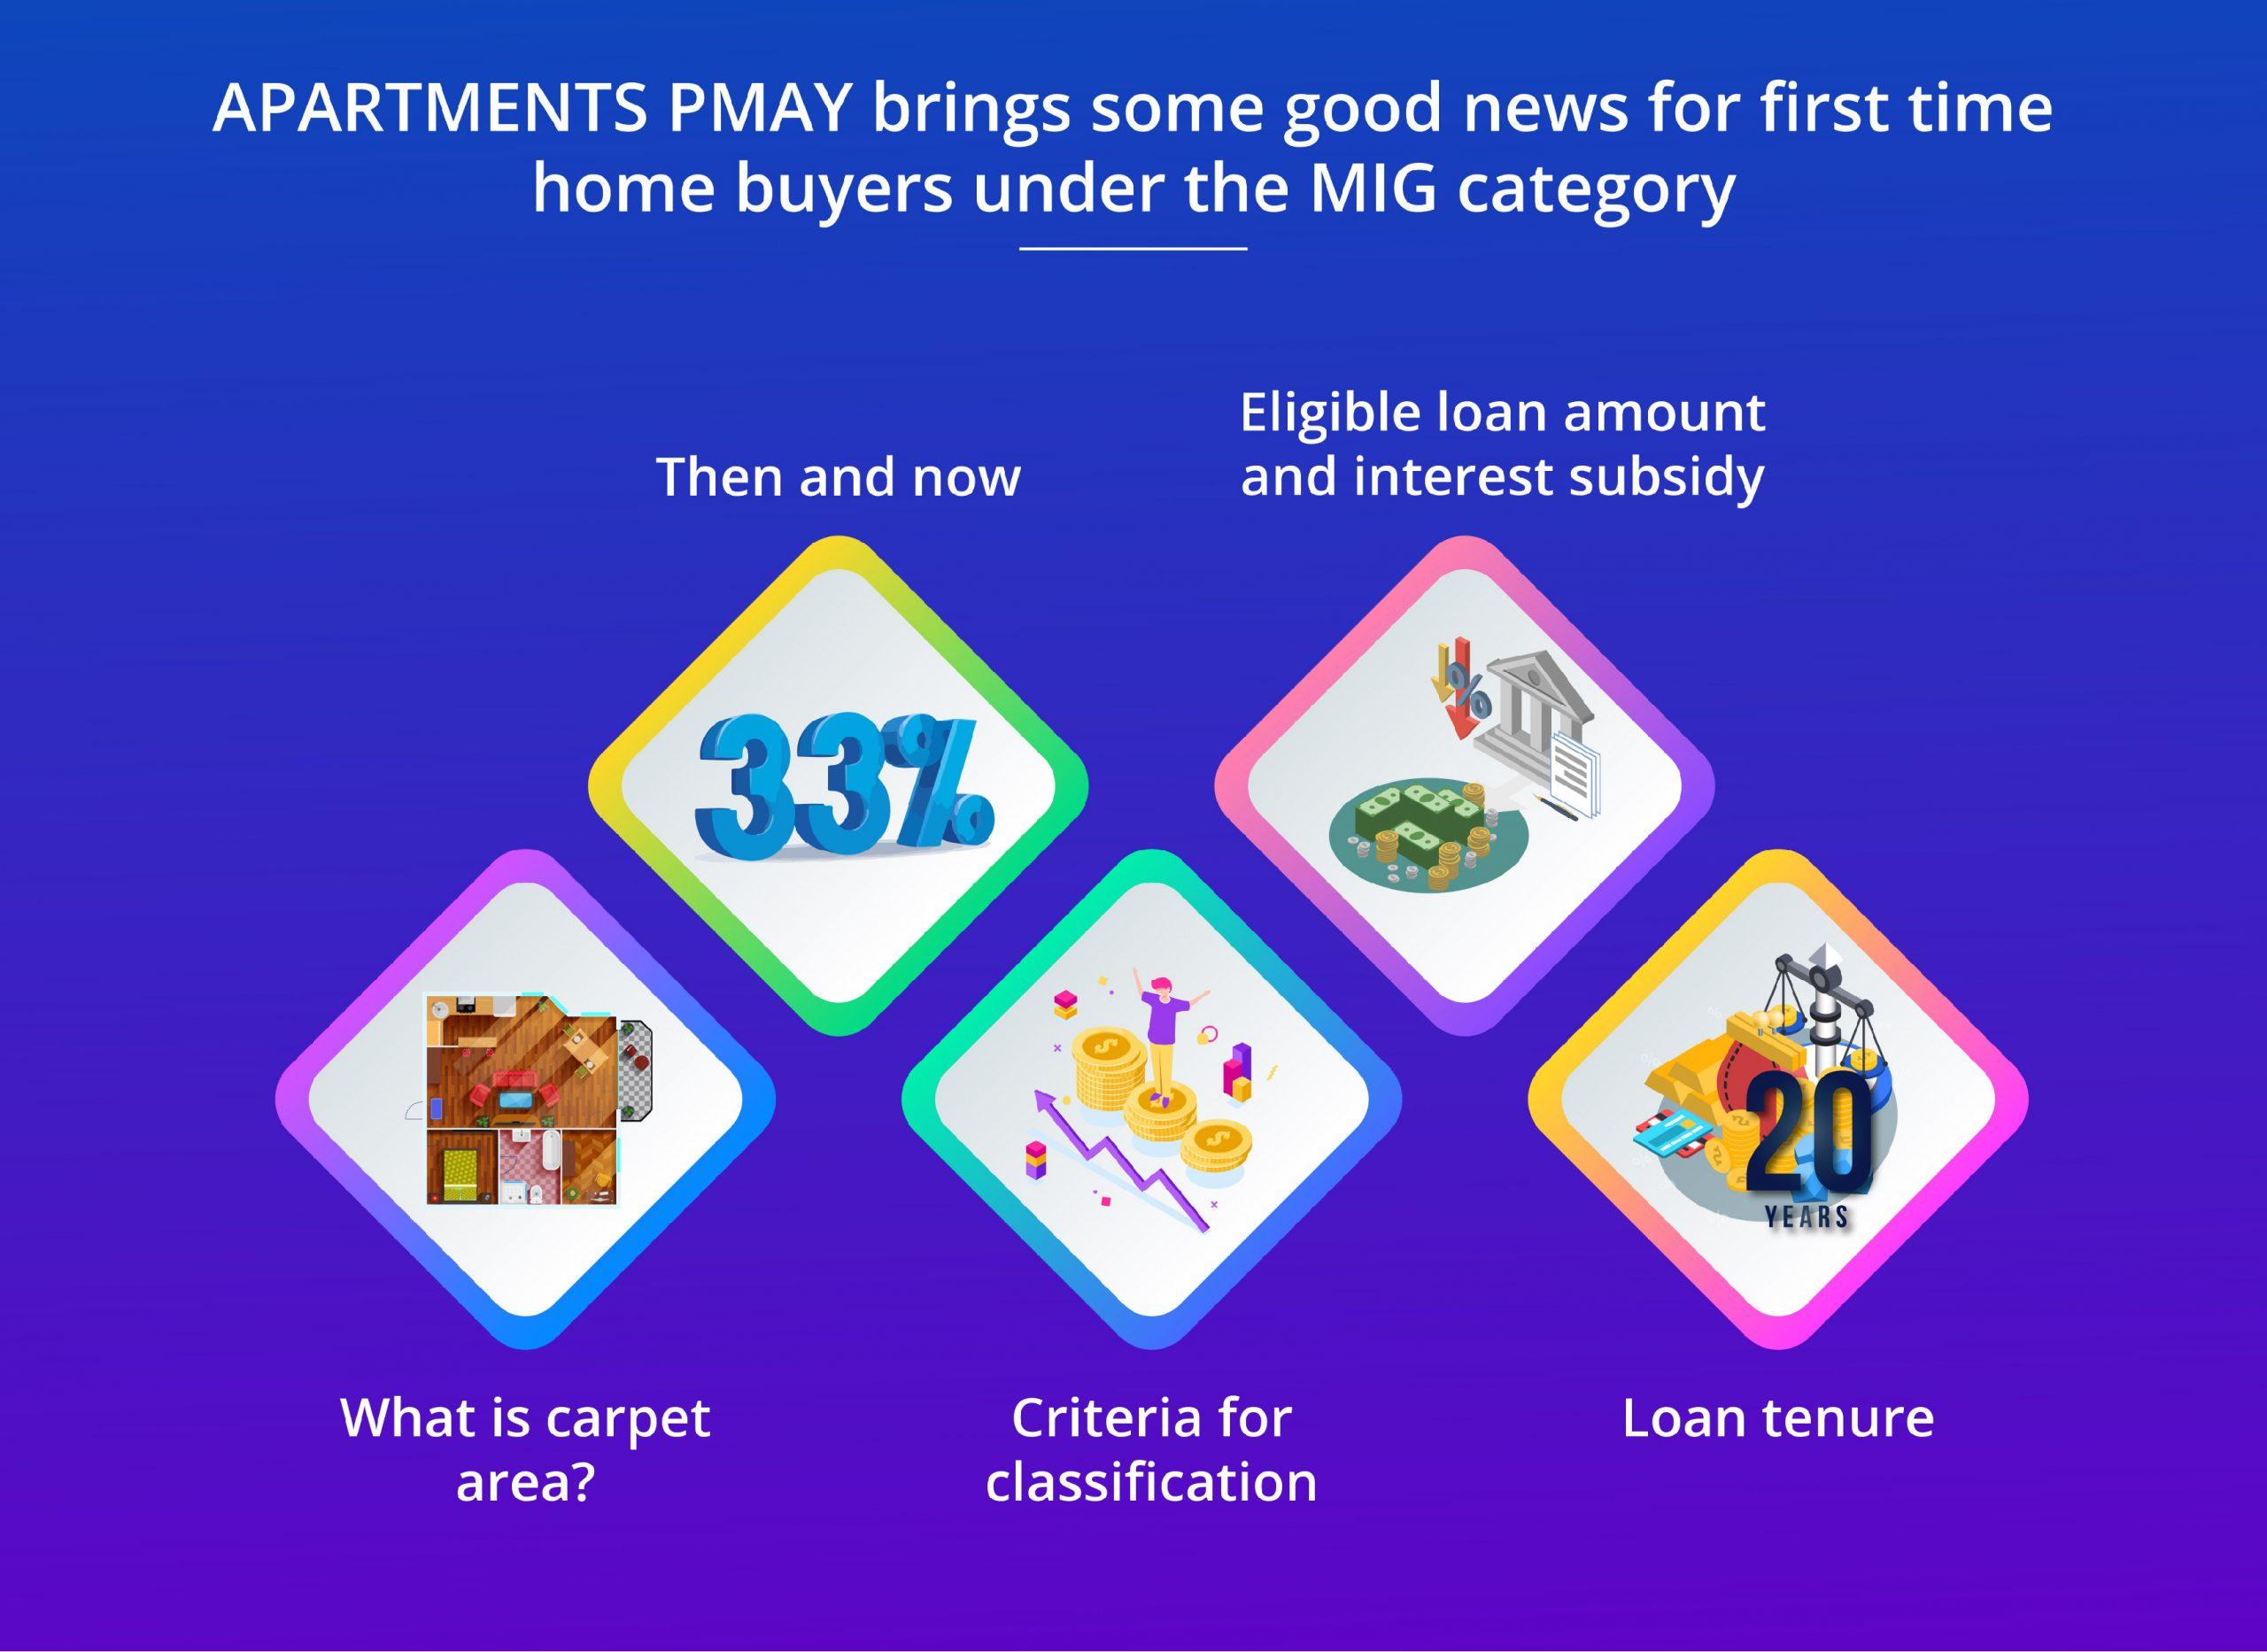 PMAY brings some good news for first time home buyers under the MIG category